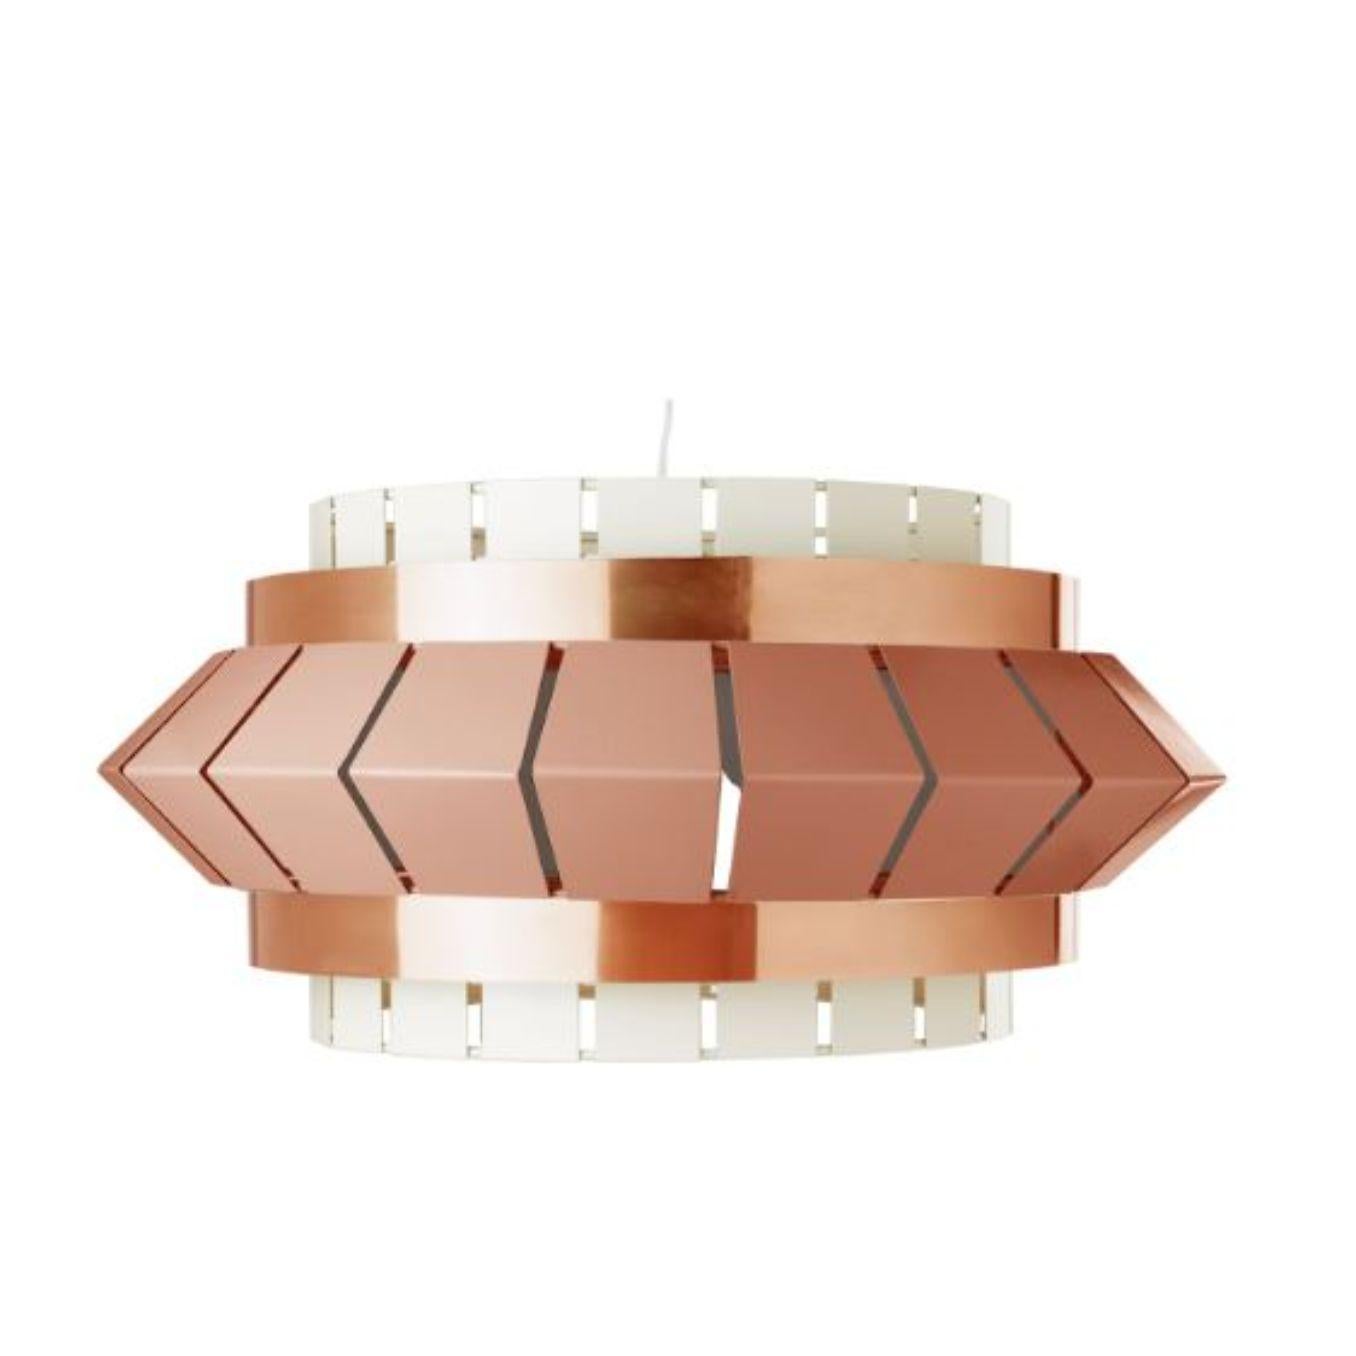 Ivory and Jade Comb I Suspension lamp with Copper ring by Dooq
Dimensions: W 75 x D 75 x H 35 cm
Materials: lacquered metal, polished copper.
Also available in different colors and materials.

Information:
230V/50Hz
E27/1x20W LED
120V/60Hz
E26/1x15W